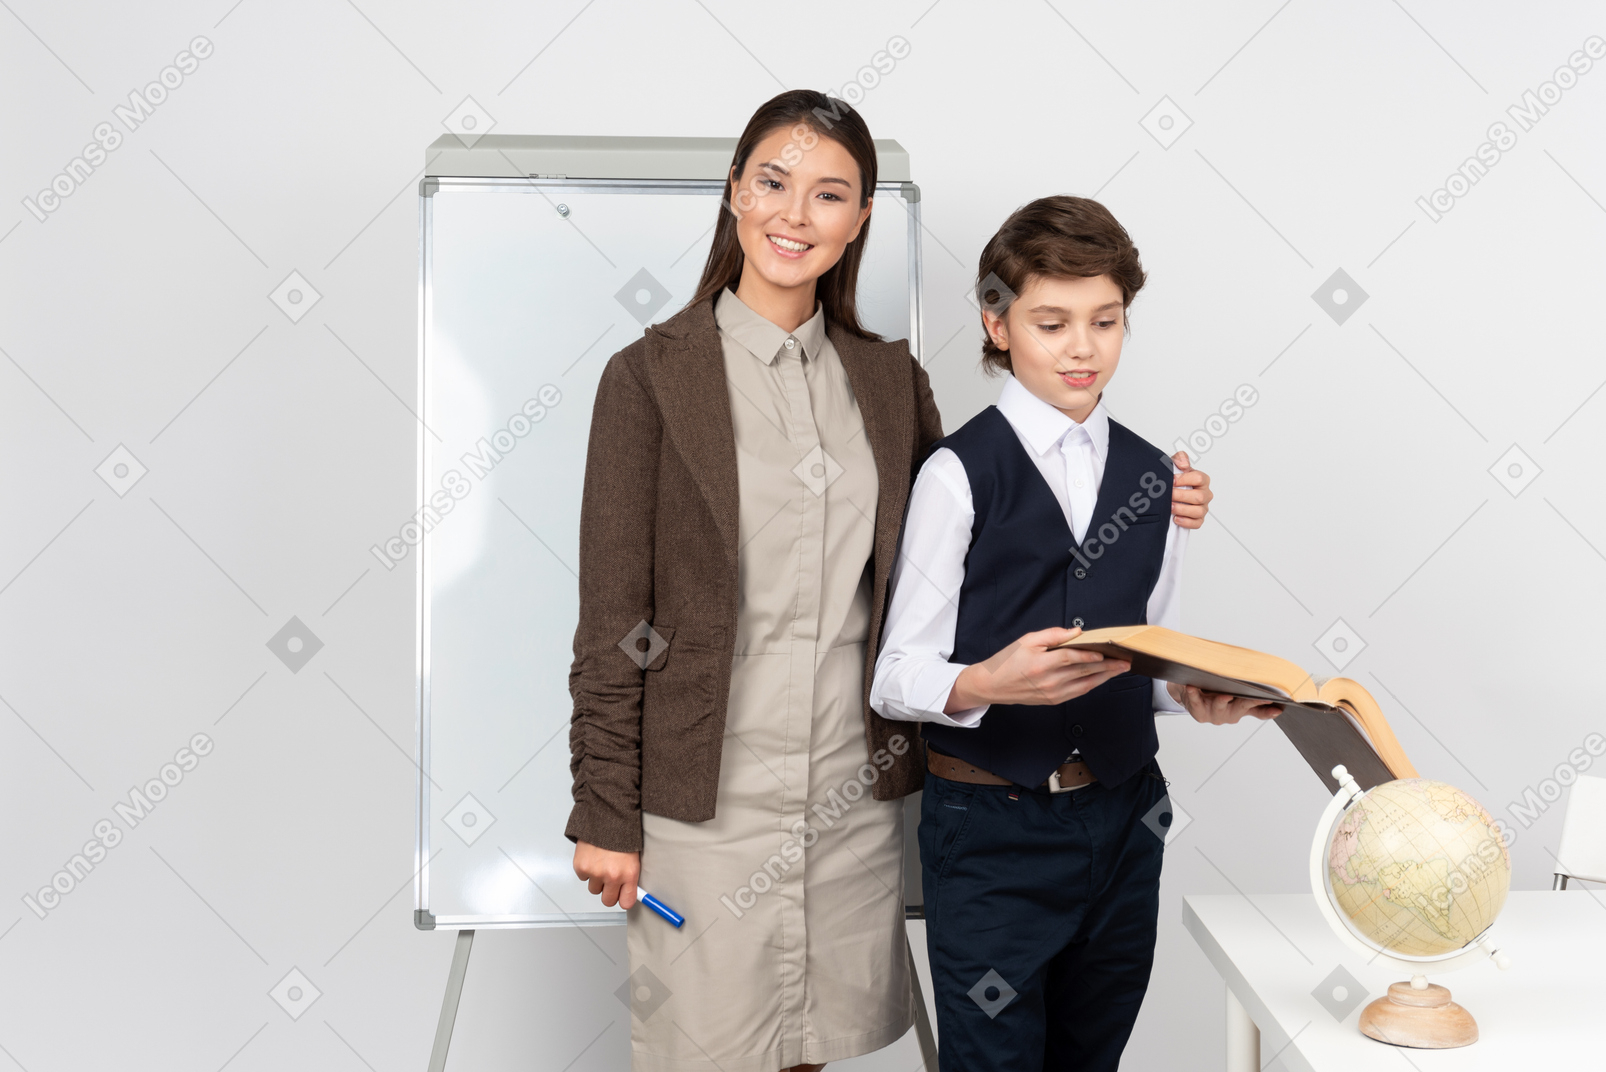 Happy young teacher and a schoolboy standing together